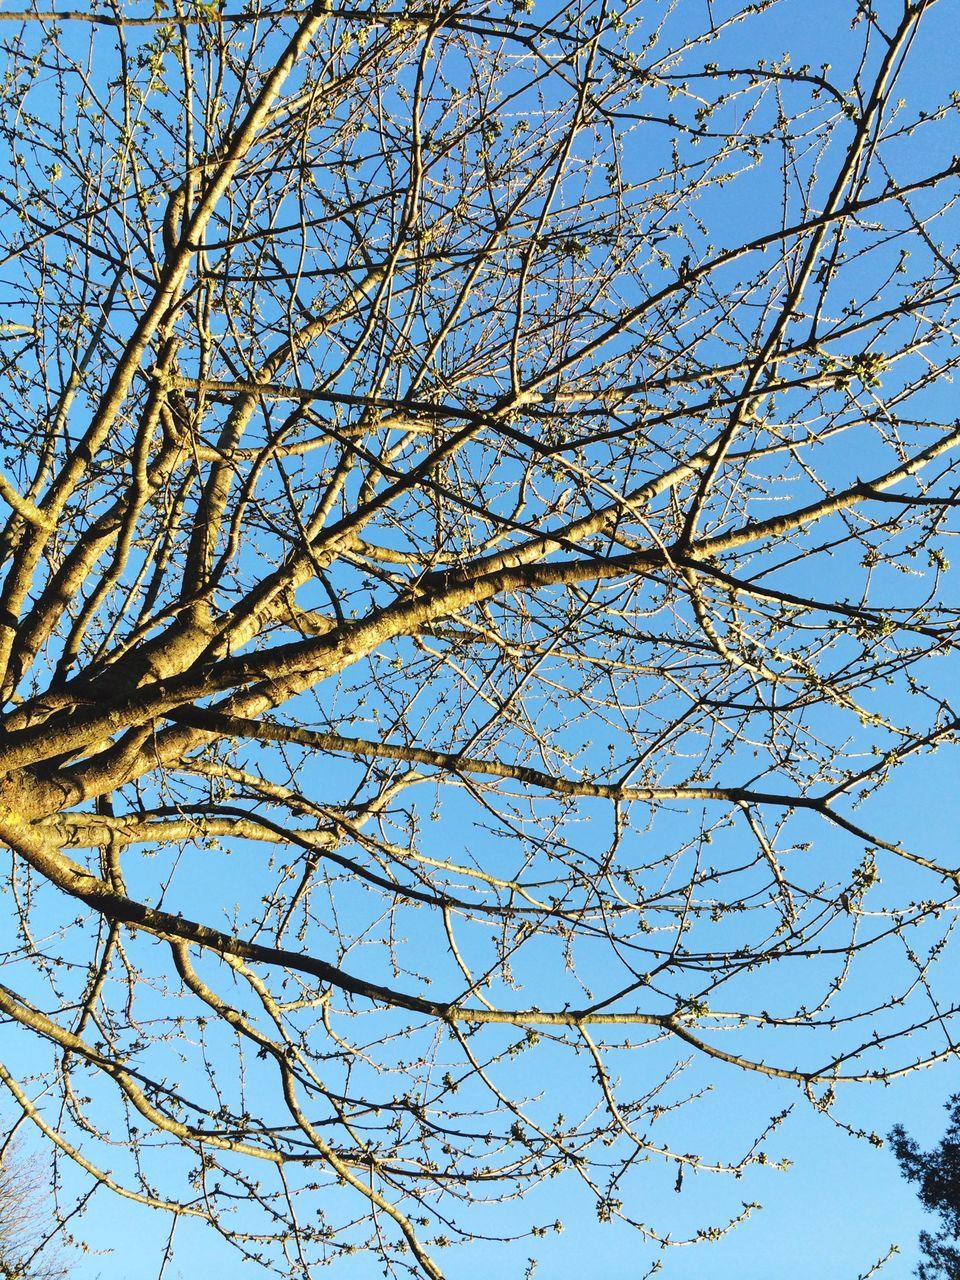 low angle view, branch, tree, clear sky, blue, nature, growth, bare tree, sky, beauty in nature, day, outdoors, tranquility, no people, backgrounds, high section, sunlight, full frame, scenics, twig